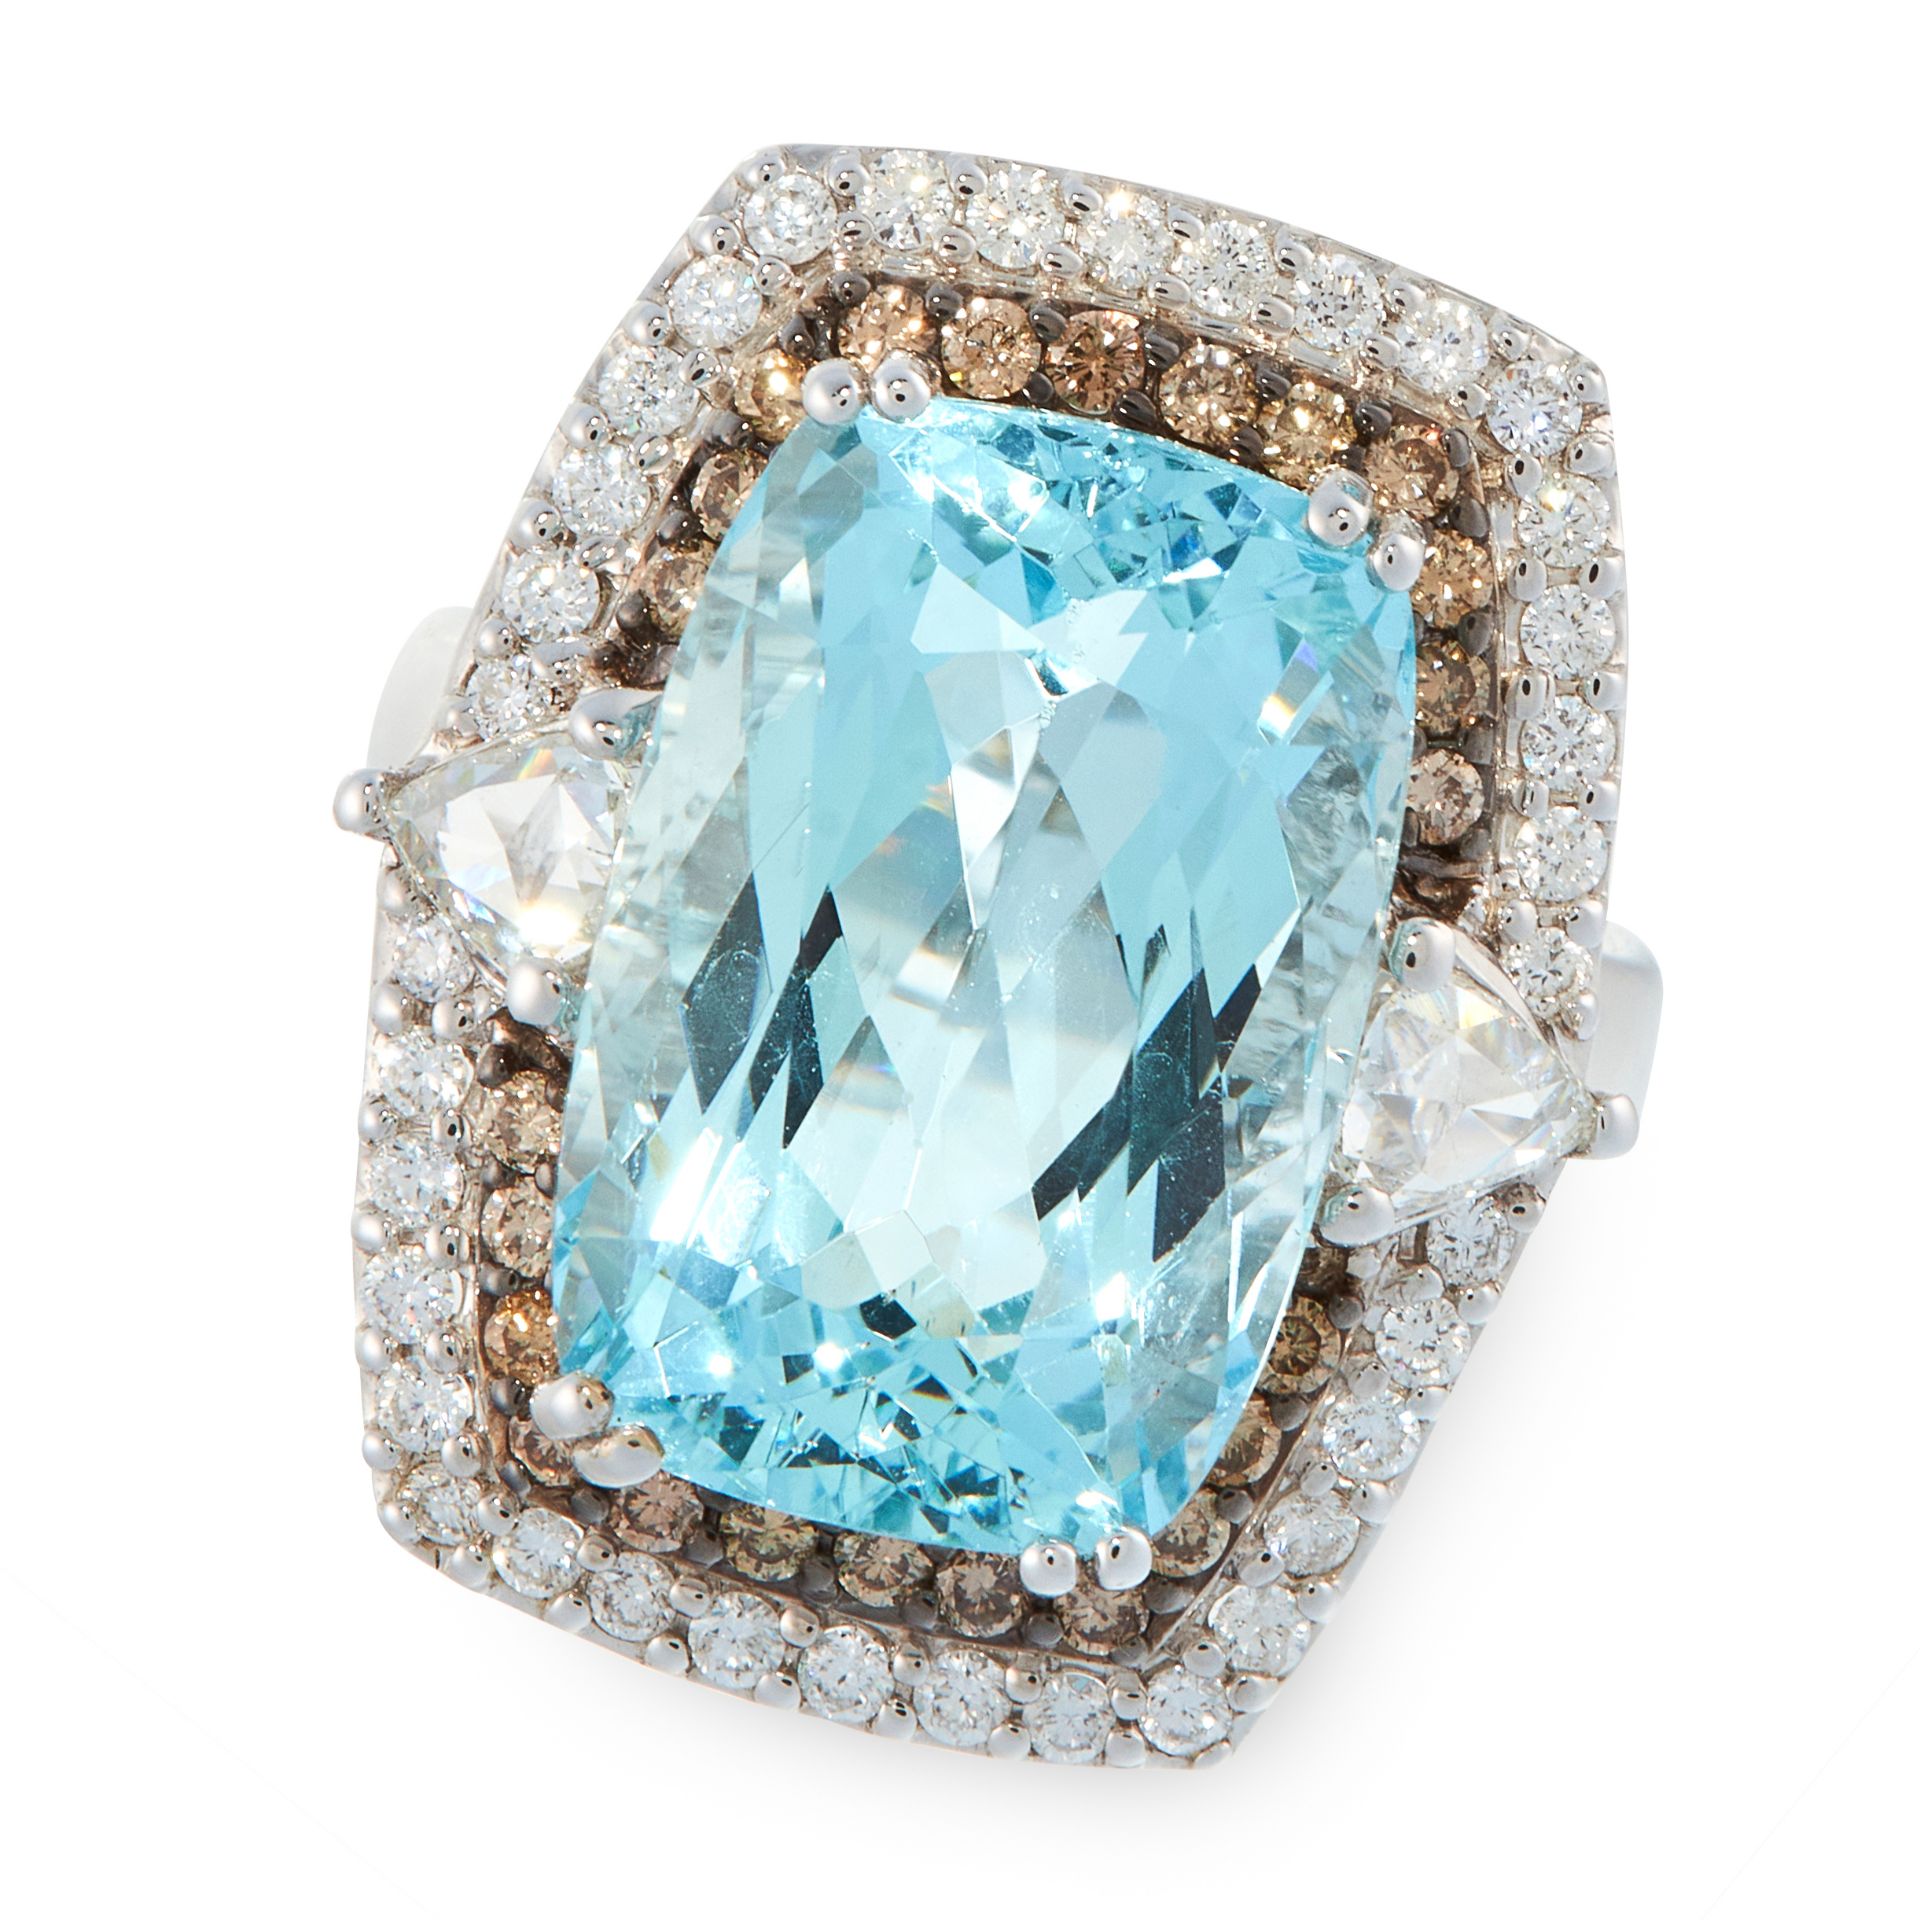 AN AQUAMARINE AND DIAMOND DRESS RING in 18ct white gold, set with a cushion cut aquamarine of 10.